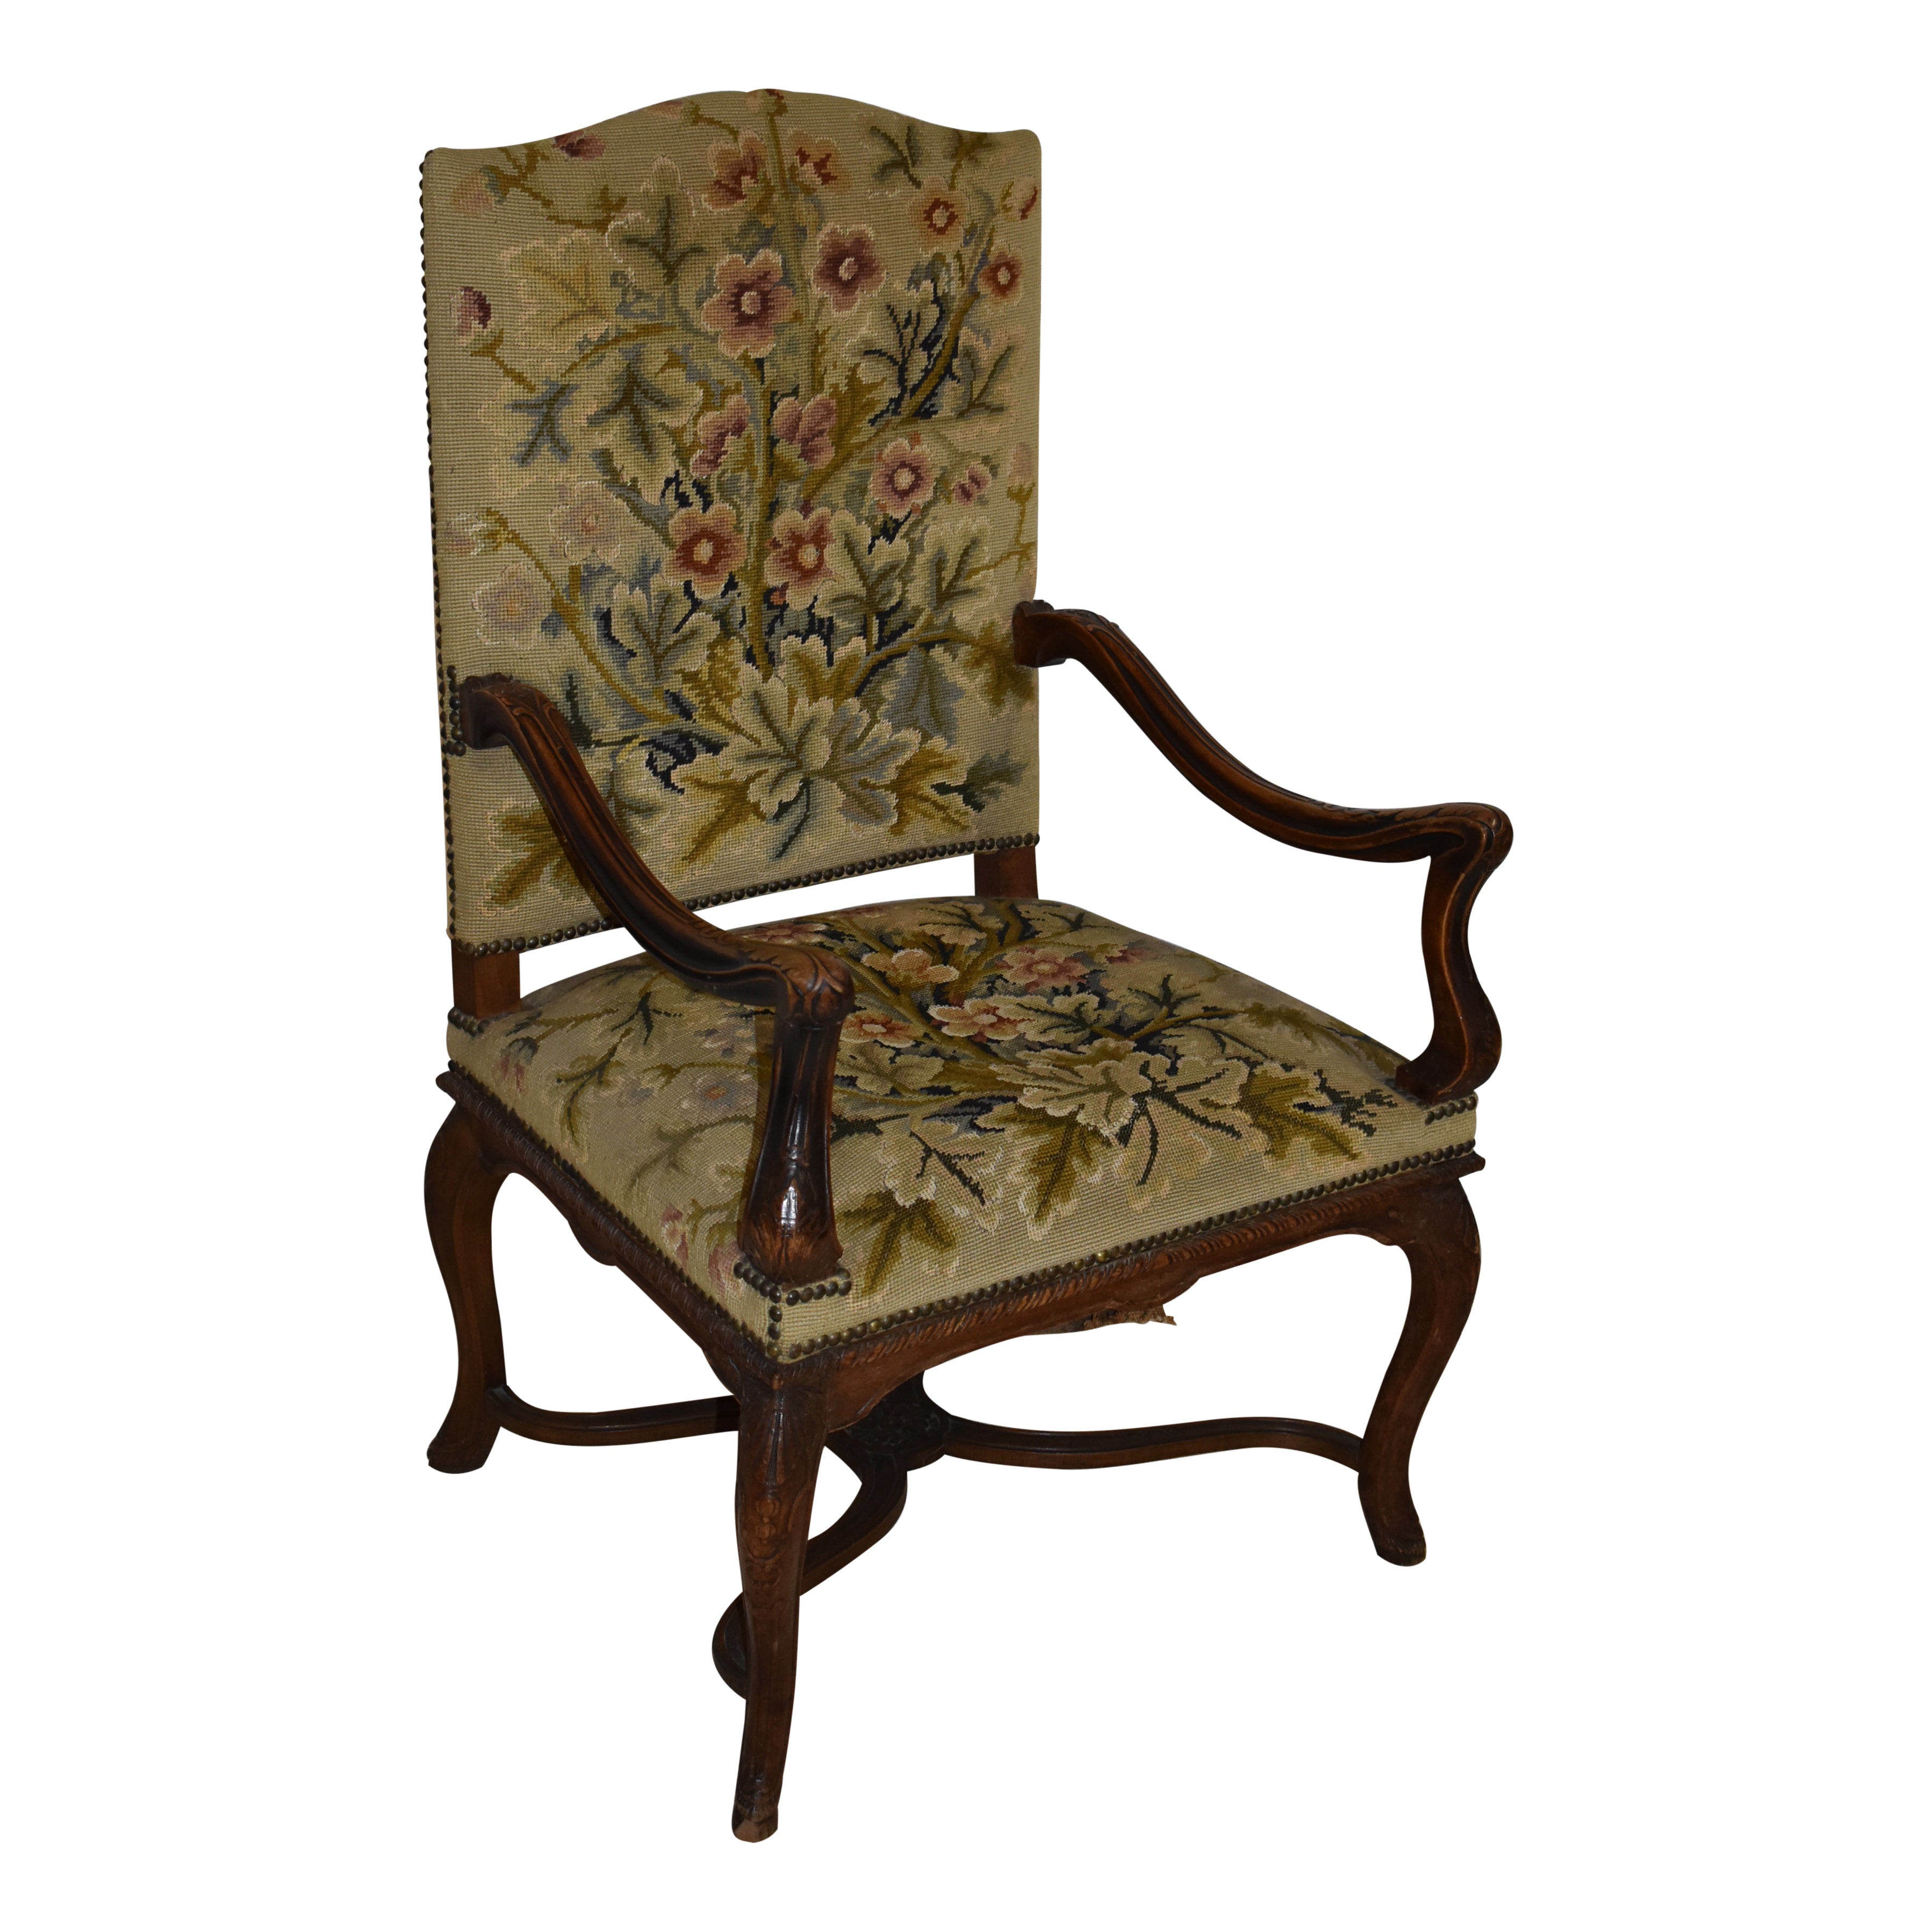 Louis XV Armchairs  Antiques in France